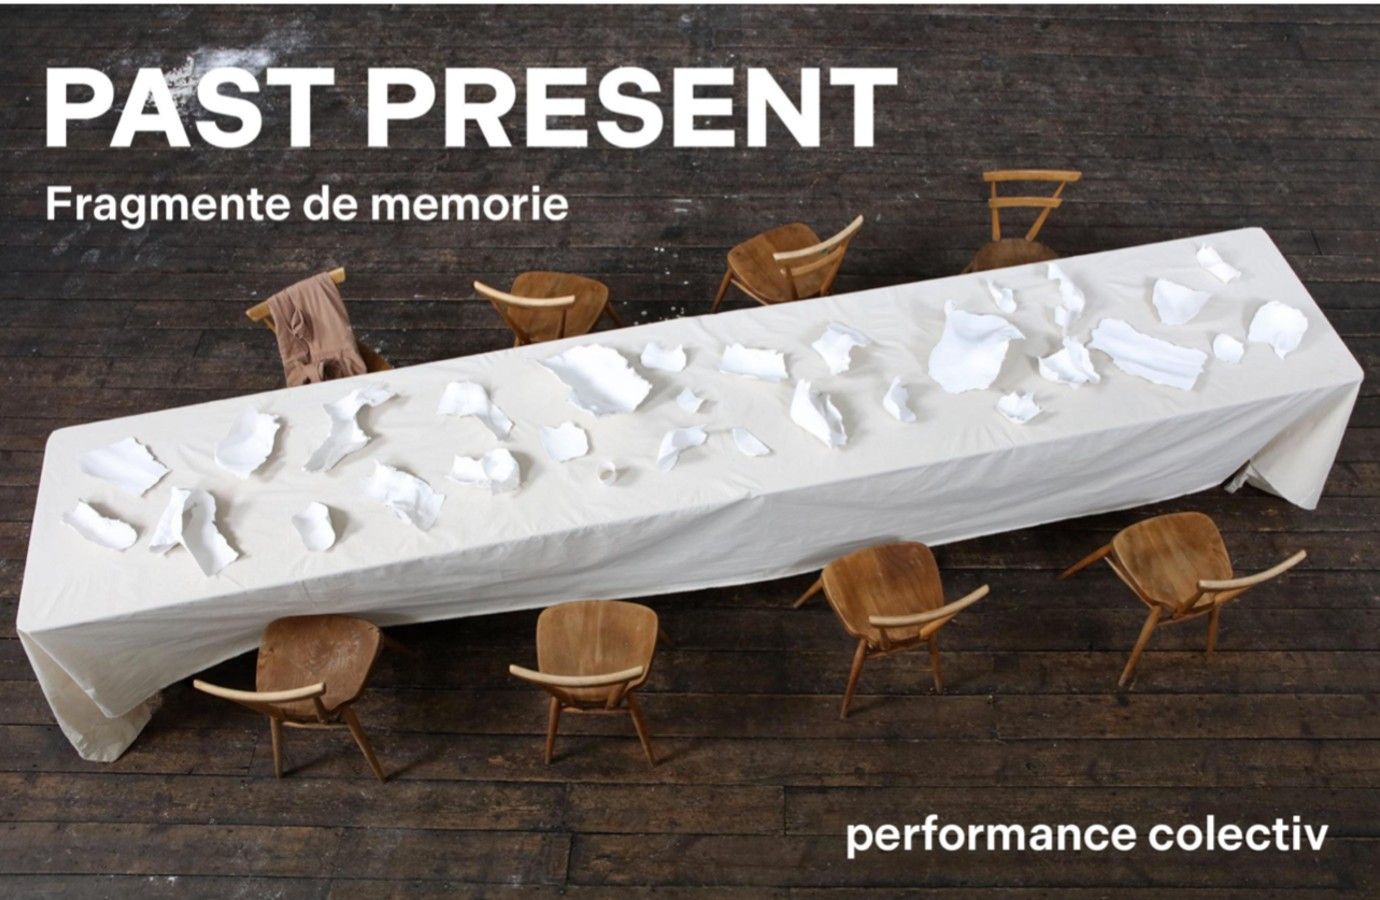 PAST PRESENT - Fragments of memory